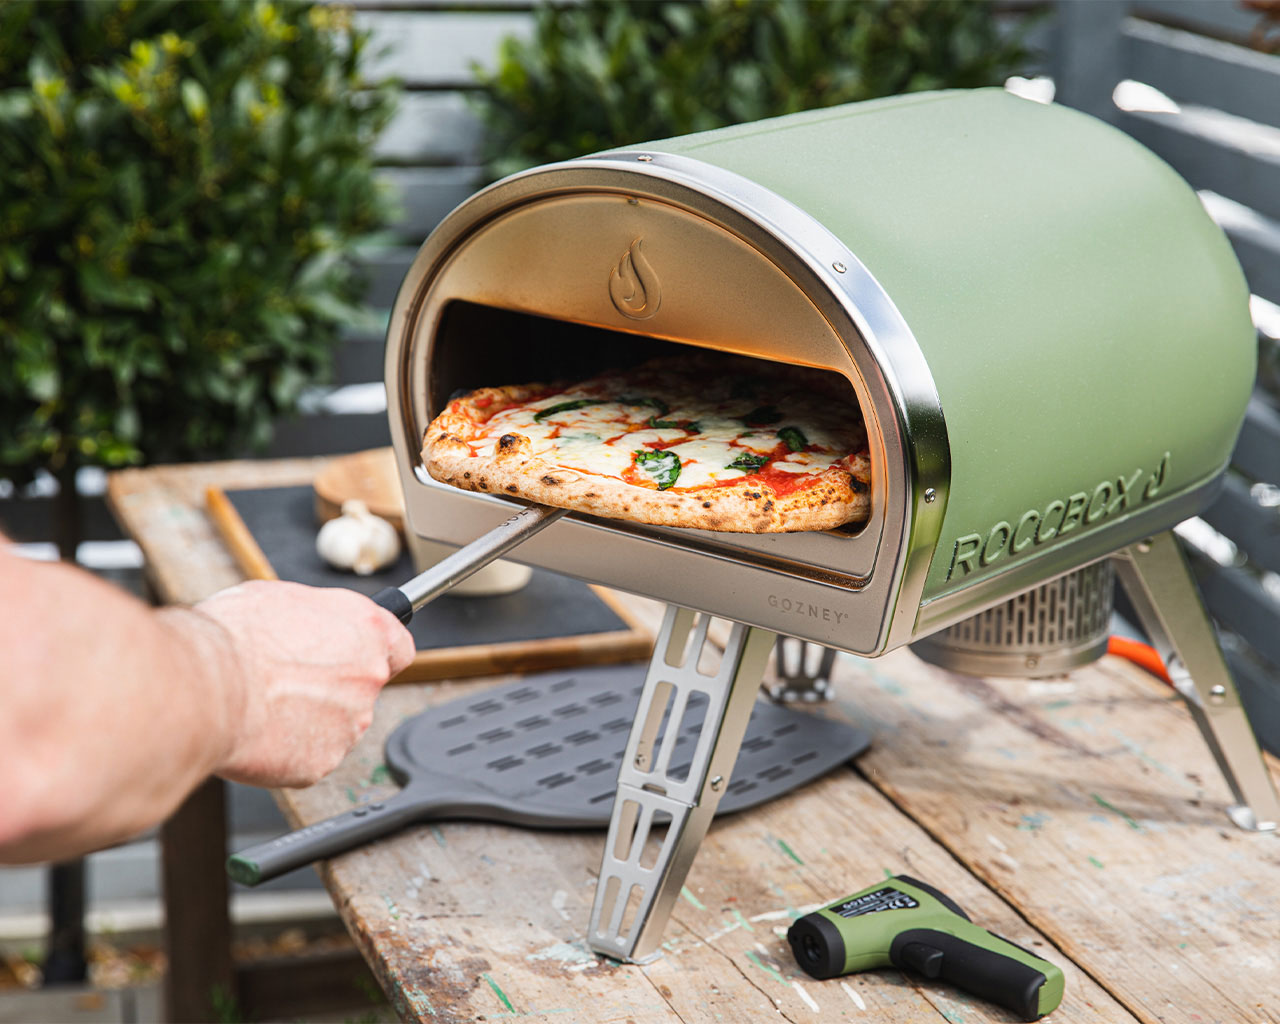 The Gozney Roccbox pizza oven, a perfect outdoorsy gift